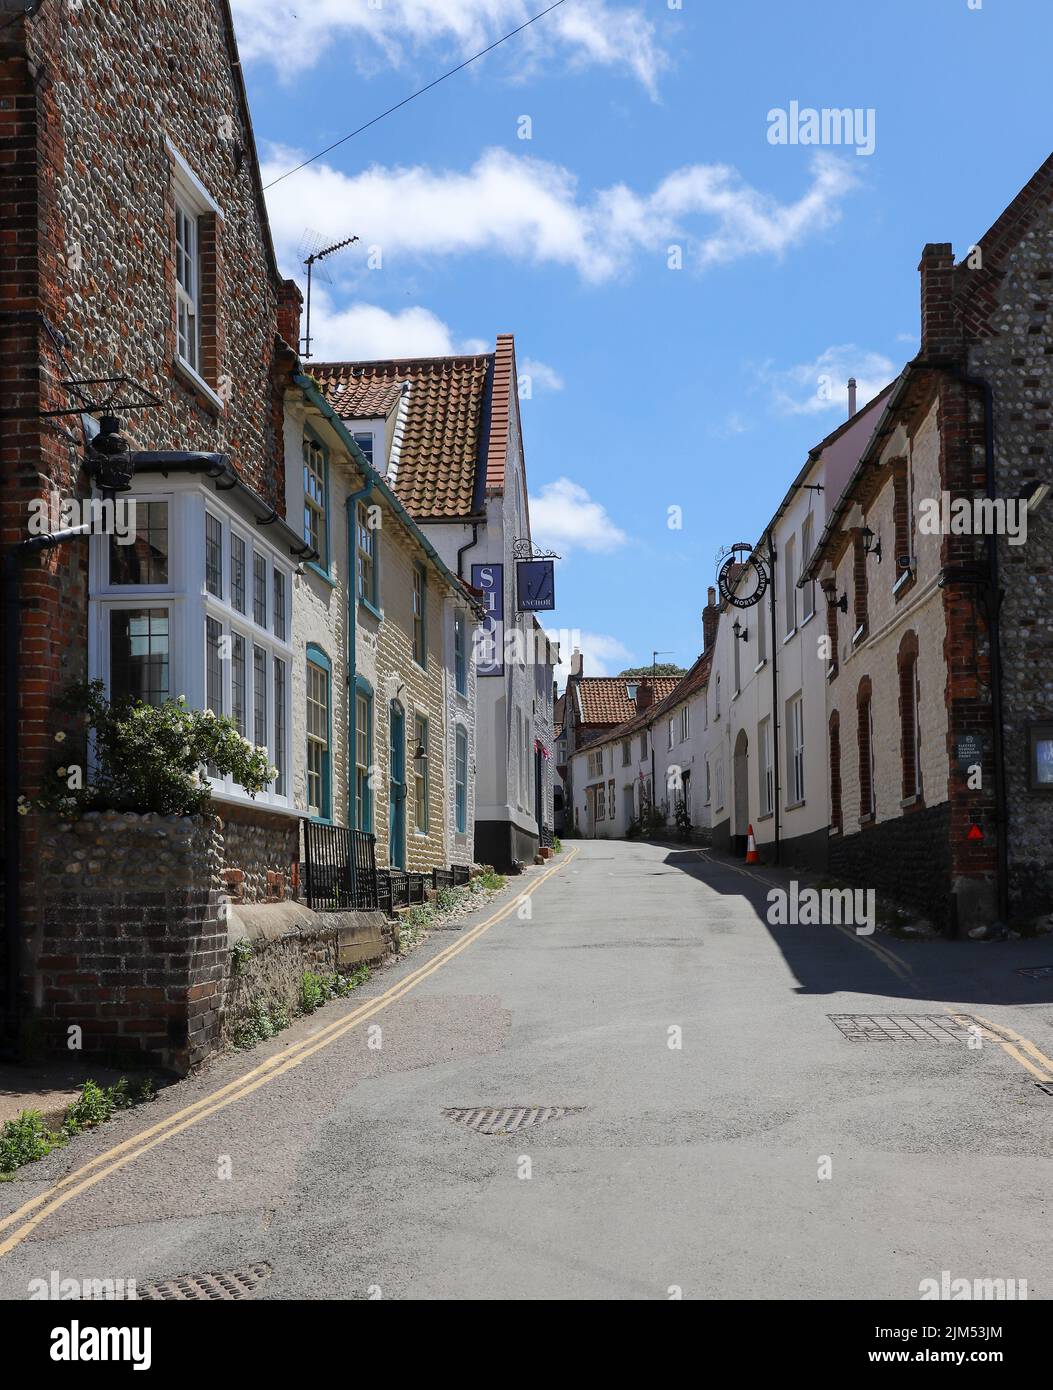 Traditional Flint built houses and shops in the High Street of Blakeney, North Norfolk in the UK Stock Photo